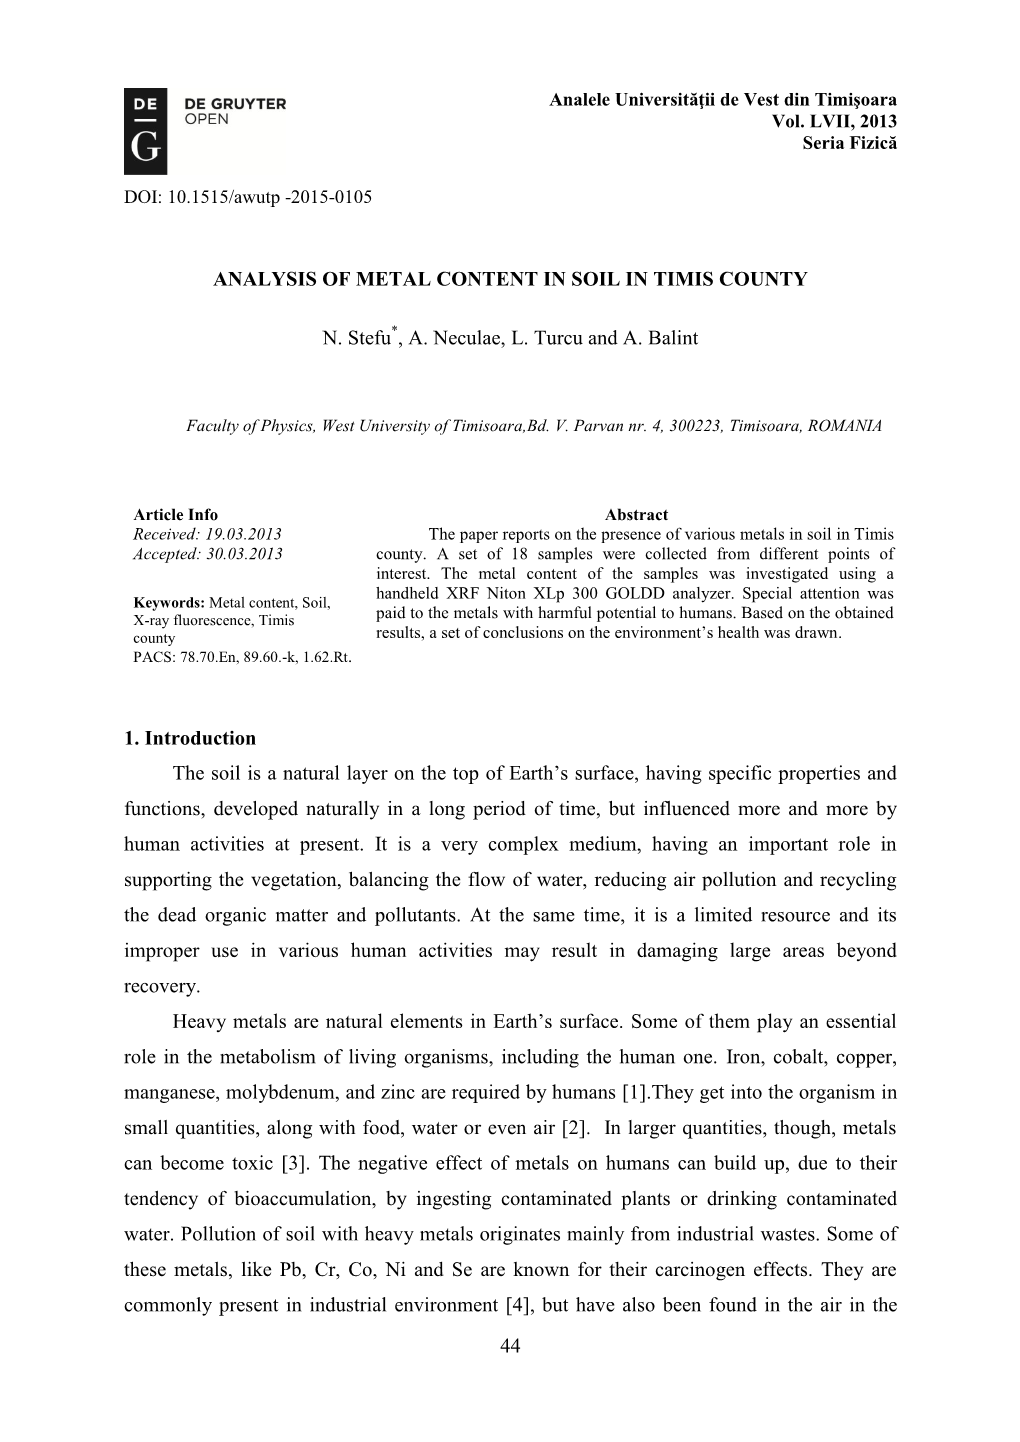 44 ANALYSIS of METAL CONTENT in SOIL in TIMIS COUNTY N. Stefu*, A. Neculae, L. Turcu and A. Balint 1. Introduction the Soil Is